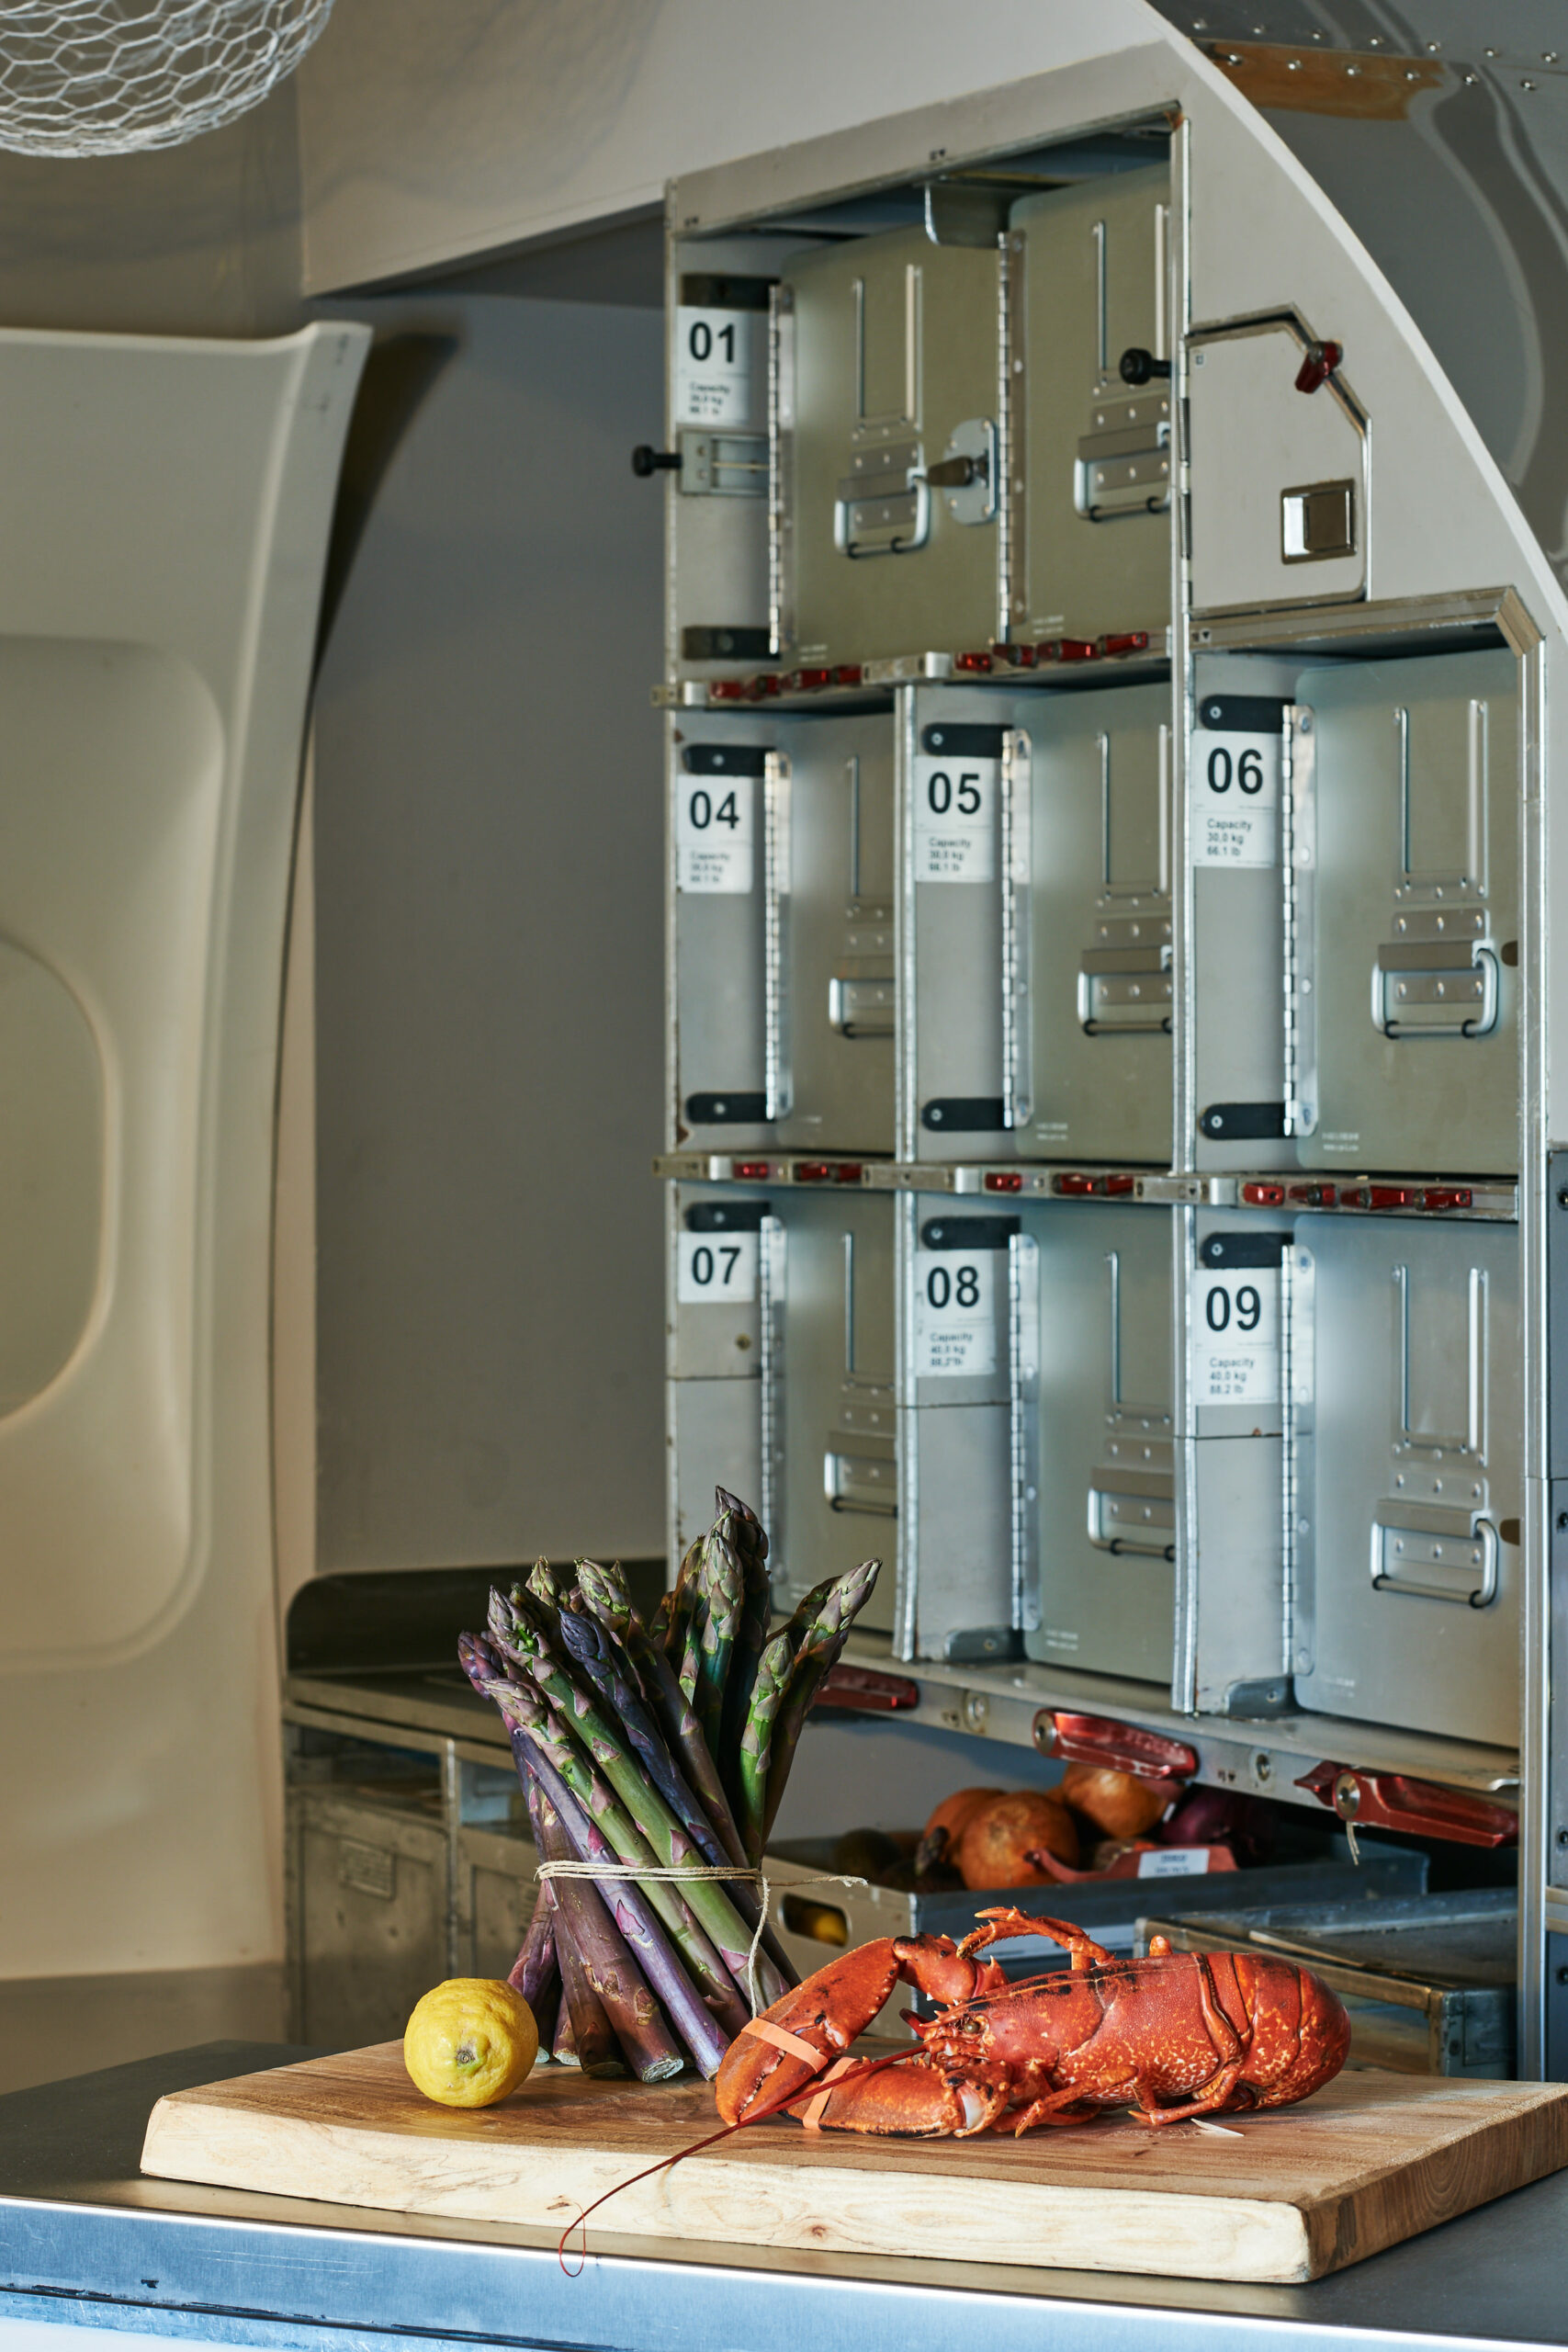 The Boeing 737 galley was transformed into a working kitchen